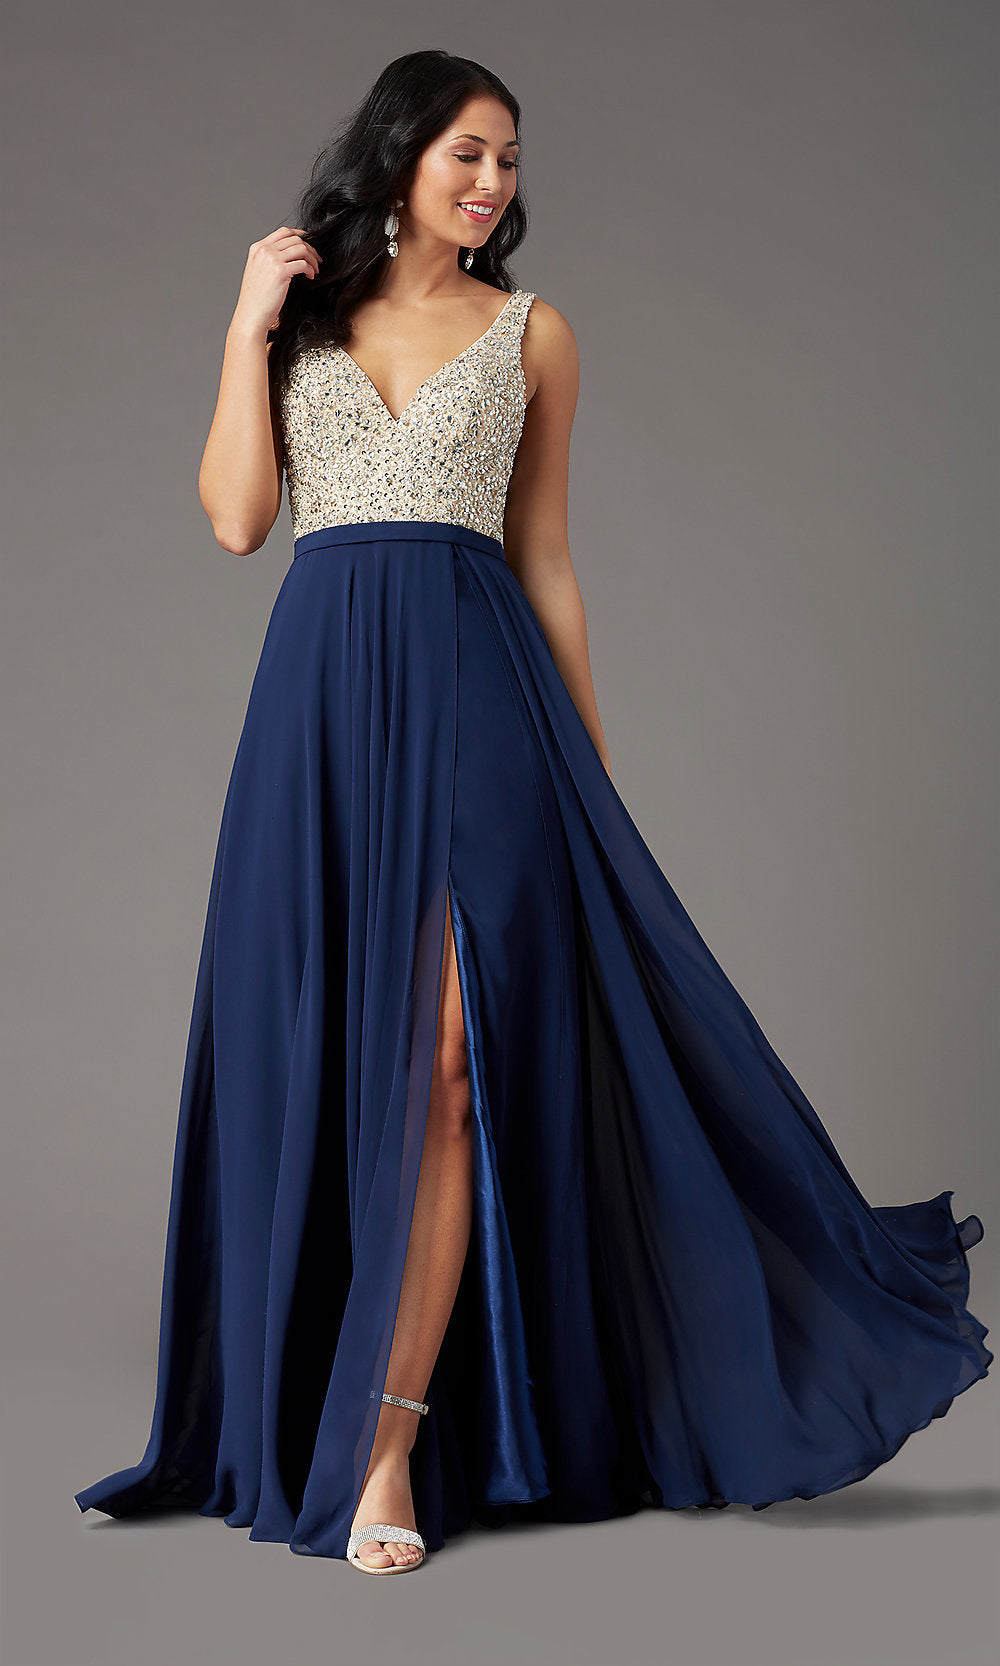 Long Prom Dress with Open Corset-Style Back - PromGirl